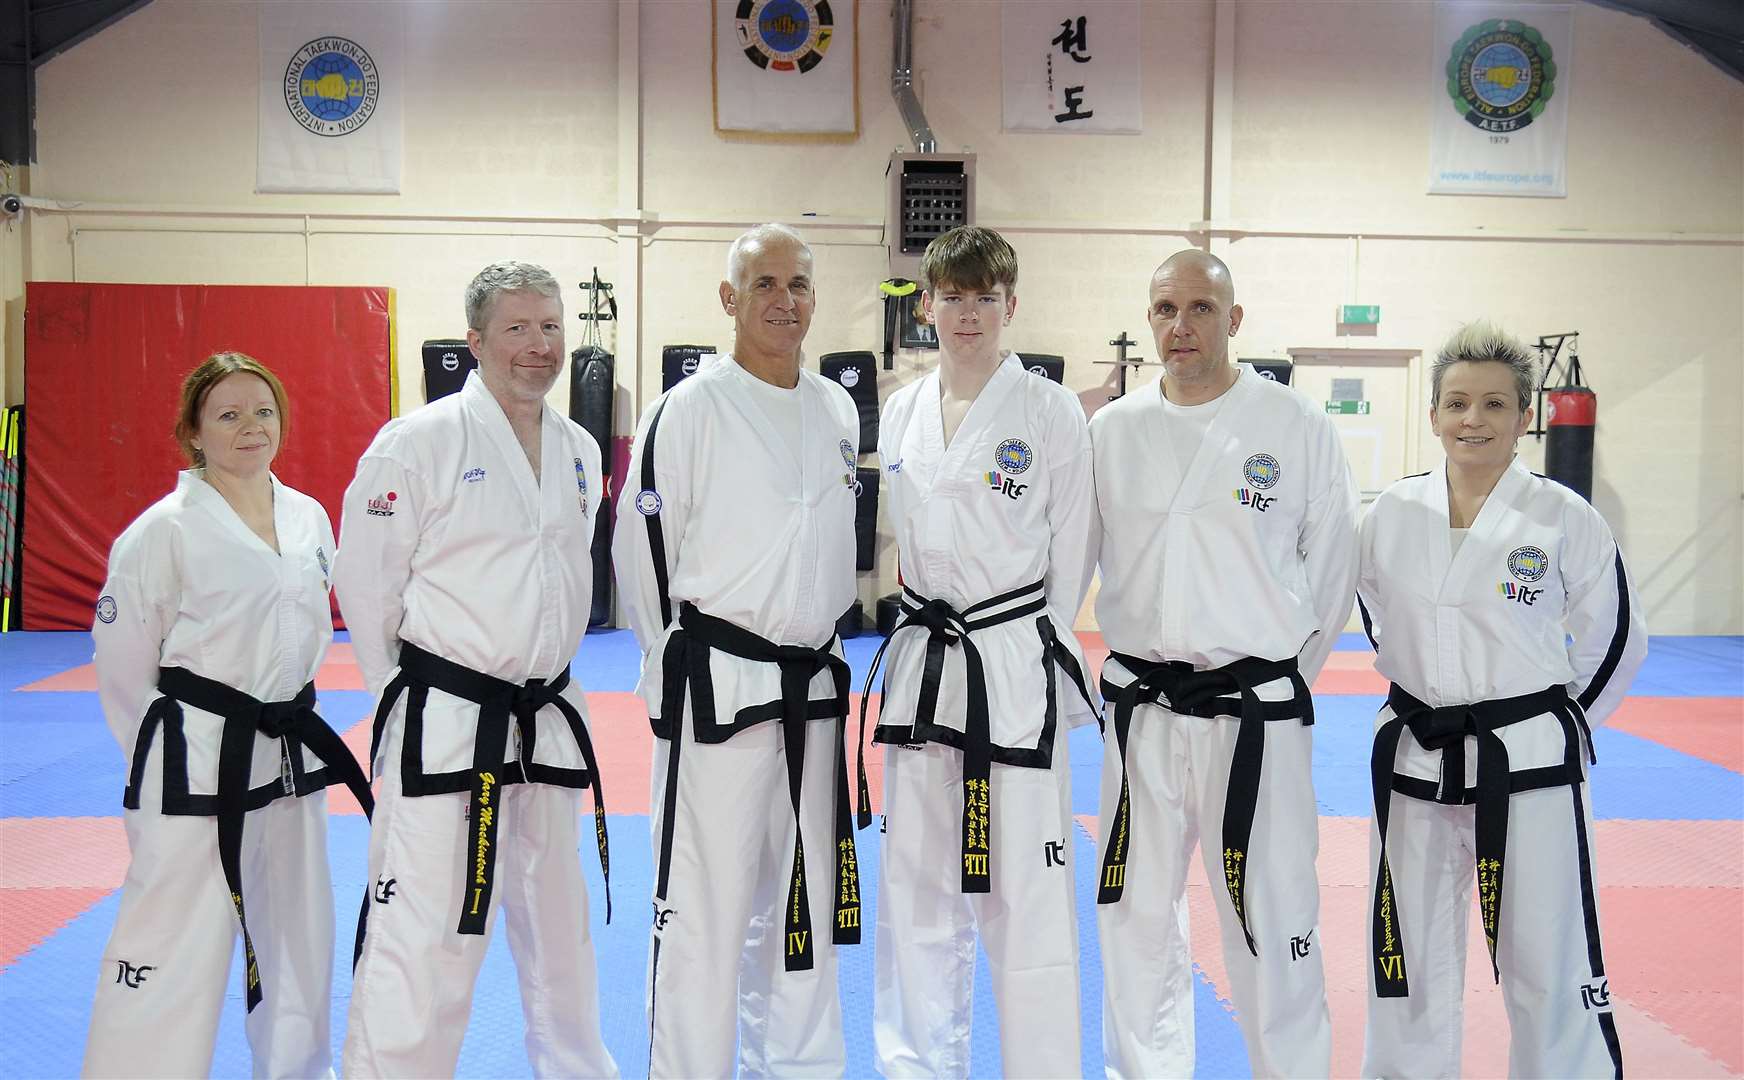 Black belt members Donna McLean 2nd degree, Gary Mackintosh 1st degree, Alan Thomson 4th degree, Lennon Porter 1st degree, Barry Scrimgeour 3rd degree and Maree McDonough 4th Degree.